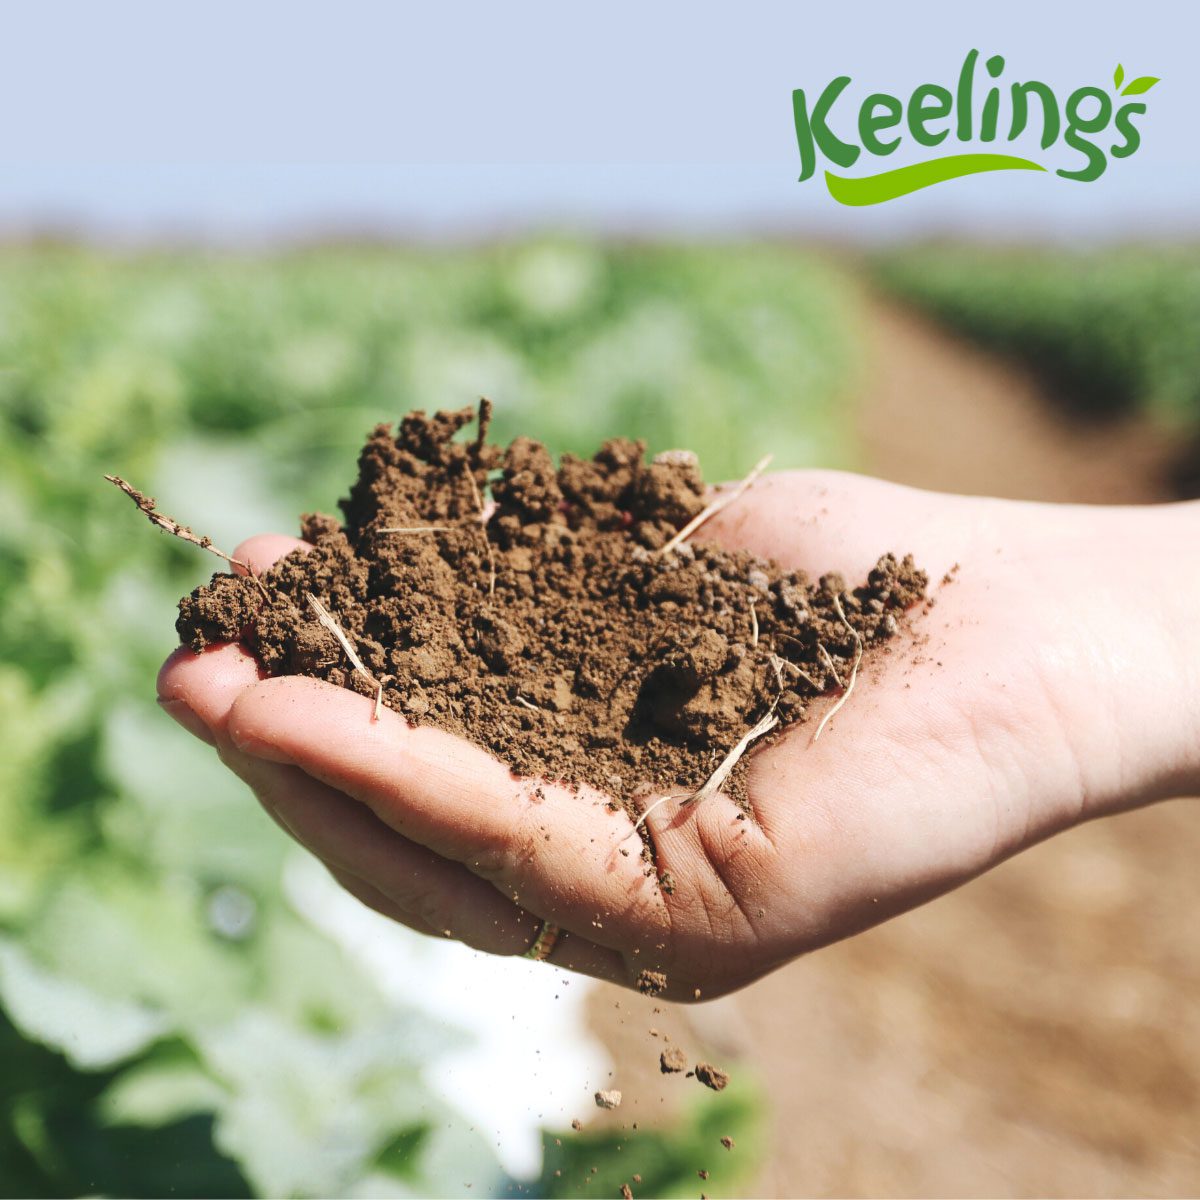 Keelings Reduces Operational Emissions by 24%